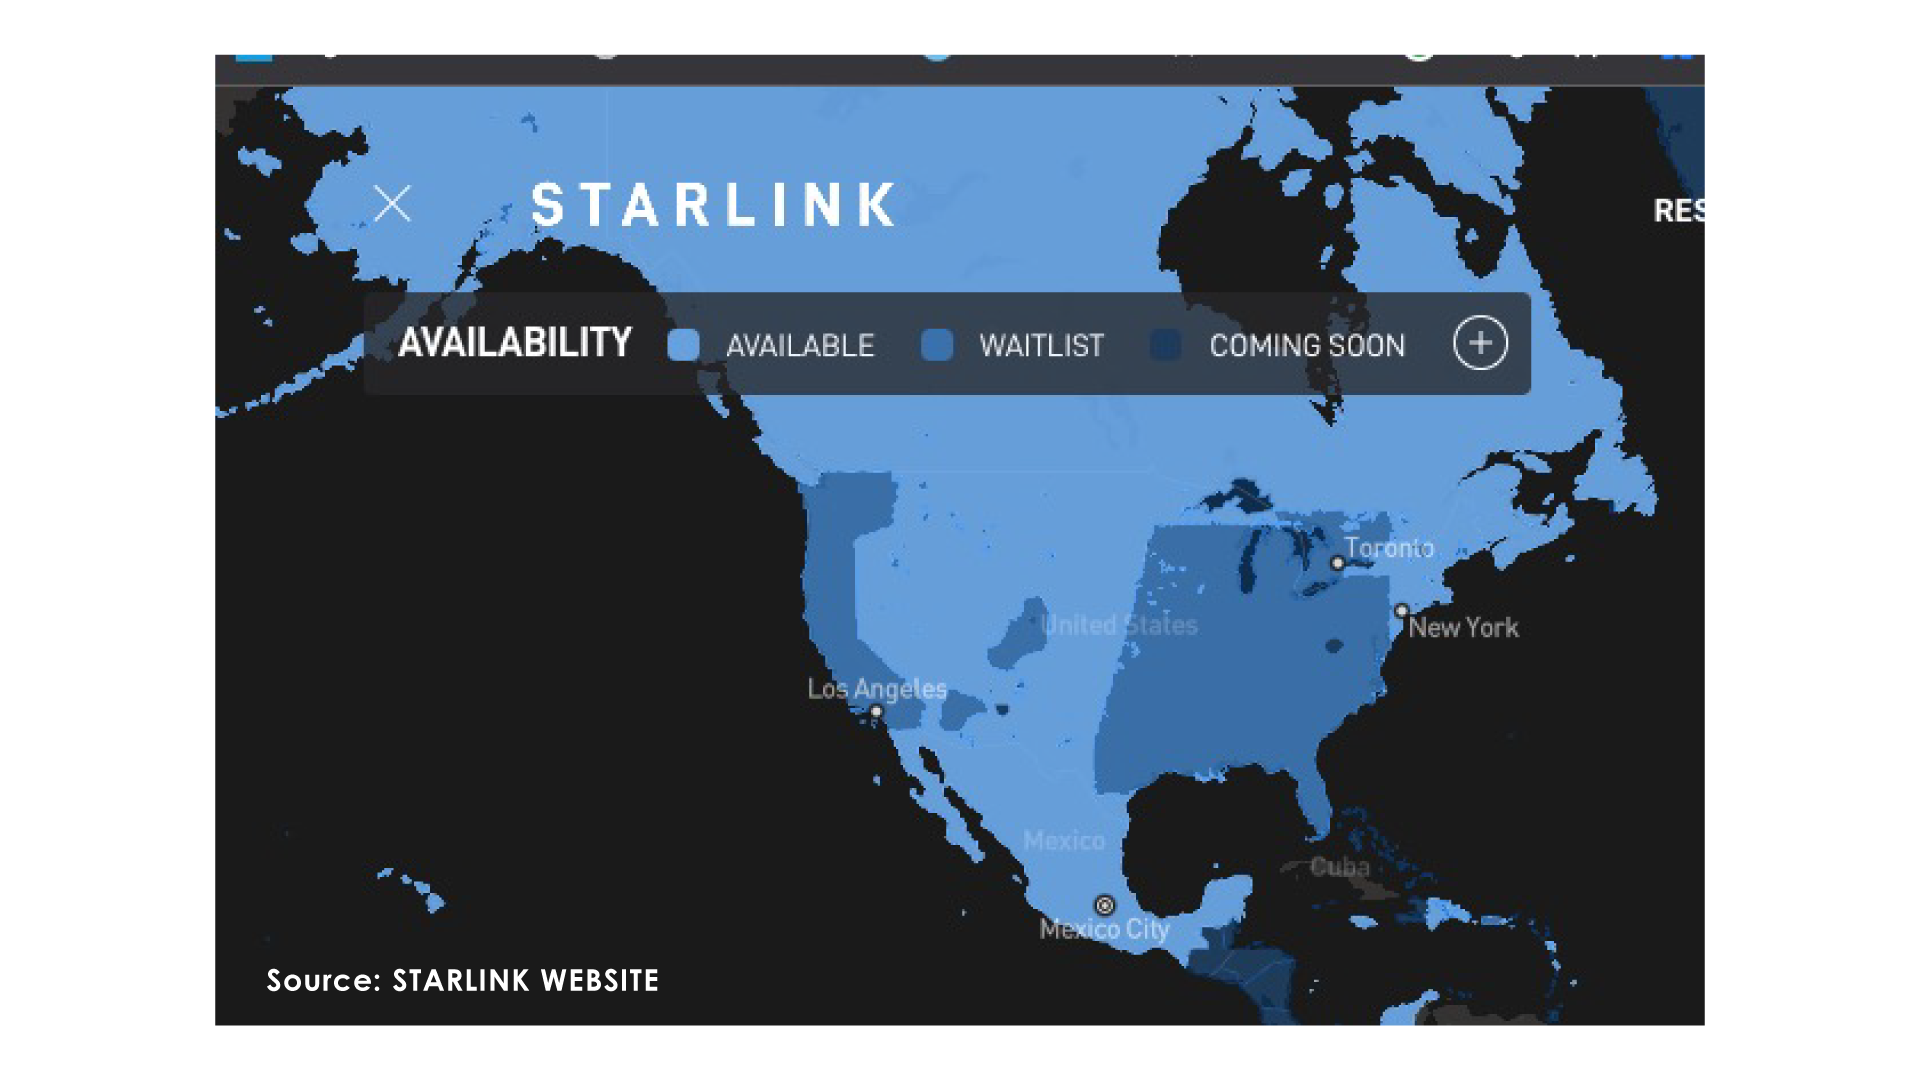 Starlink Users from i360 Consumer Pulse. Source: starlink.com